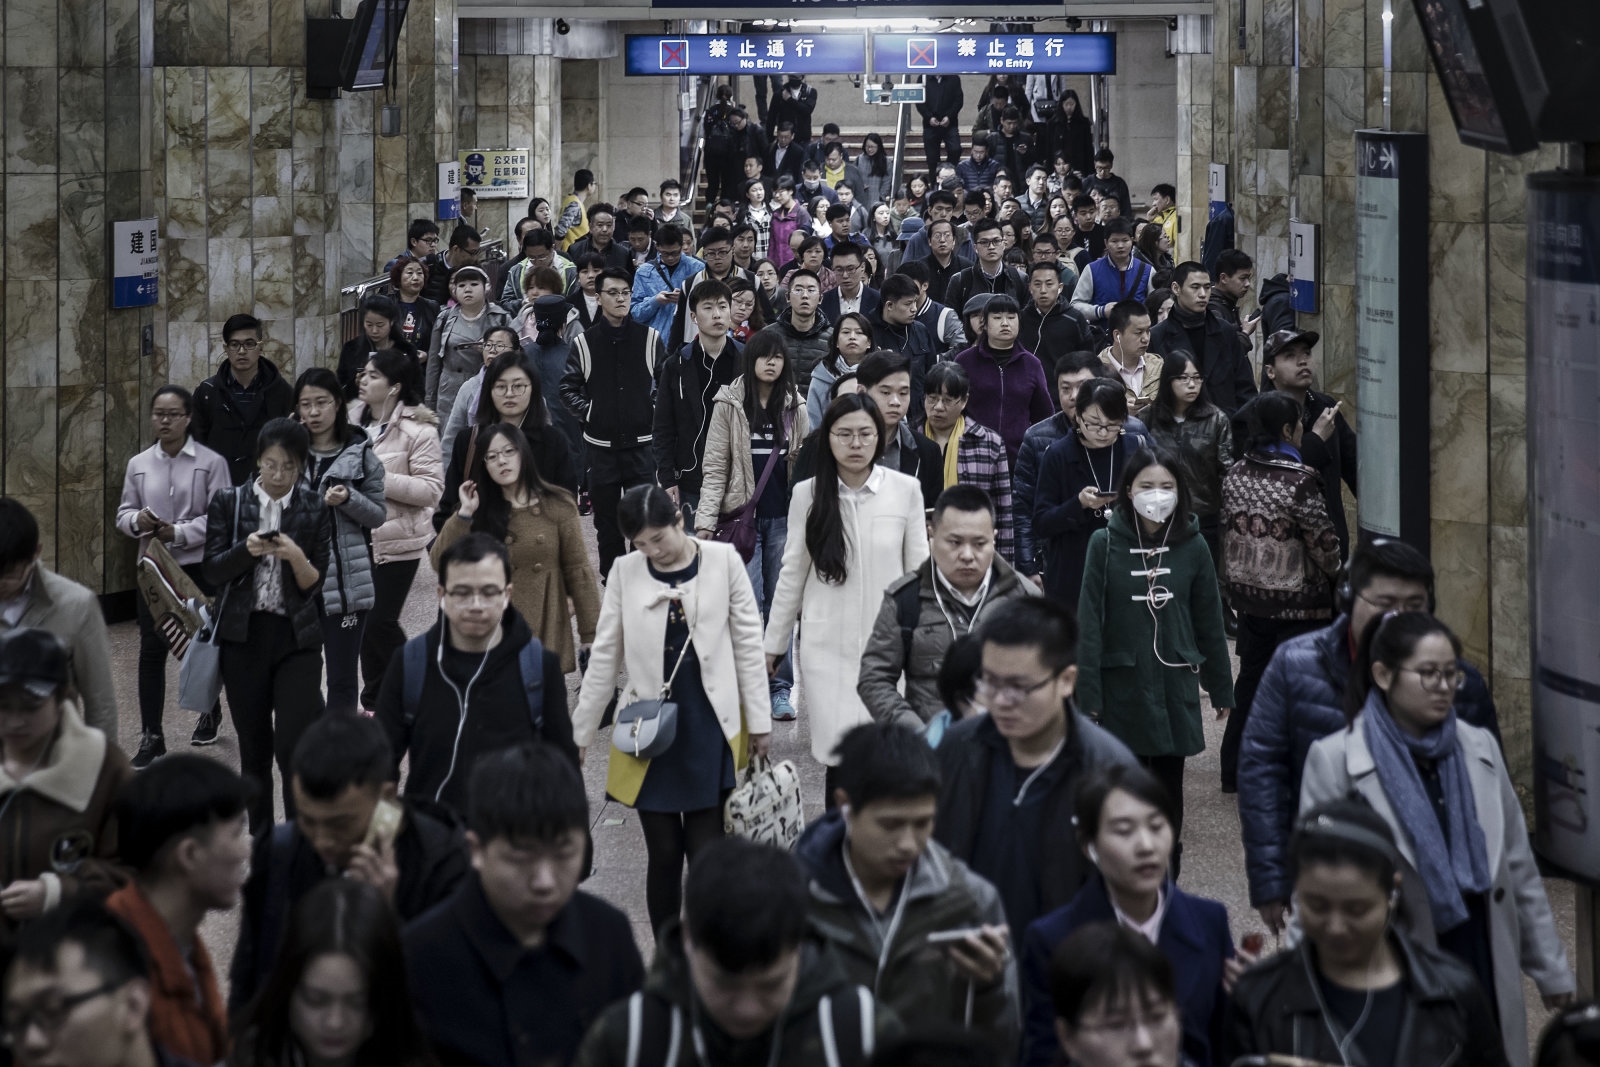 Beijing subways may soon get facial recognition and hand scanners | DeviceDaily.com